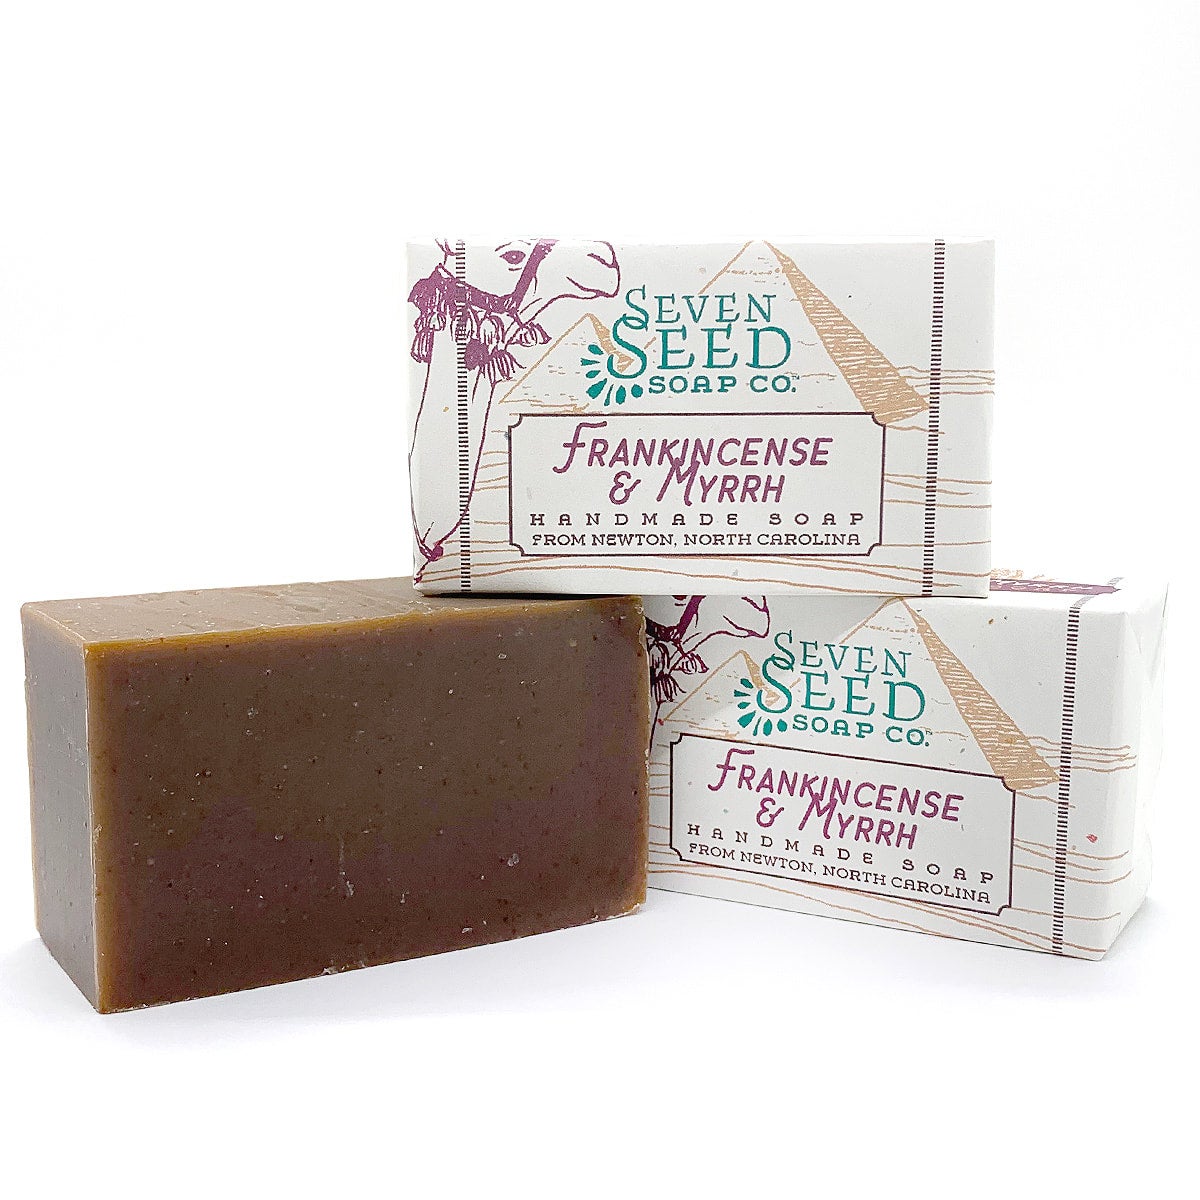 Frankincense and Myrrh Soap, Seven Seed Soap Co.